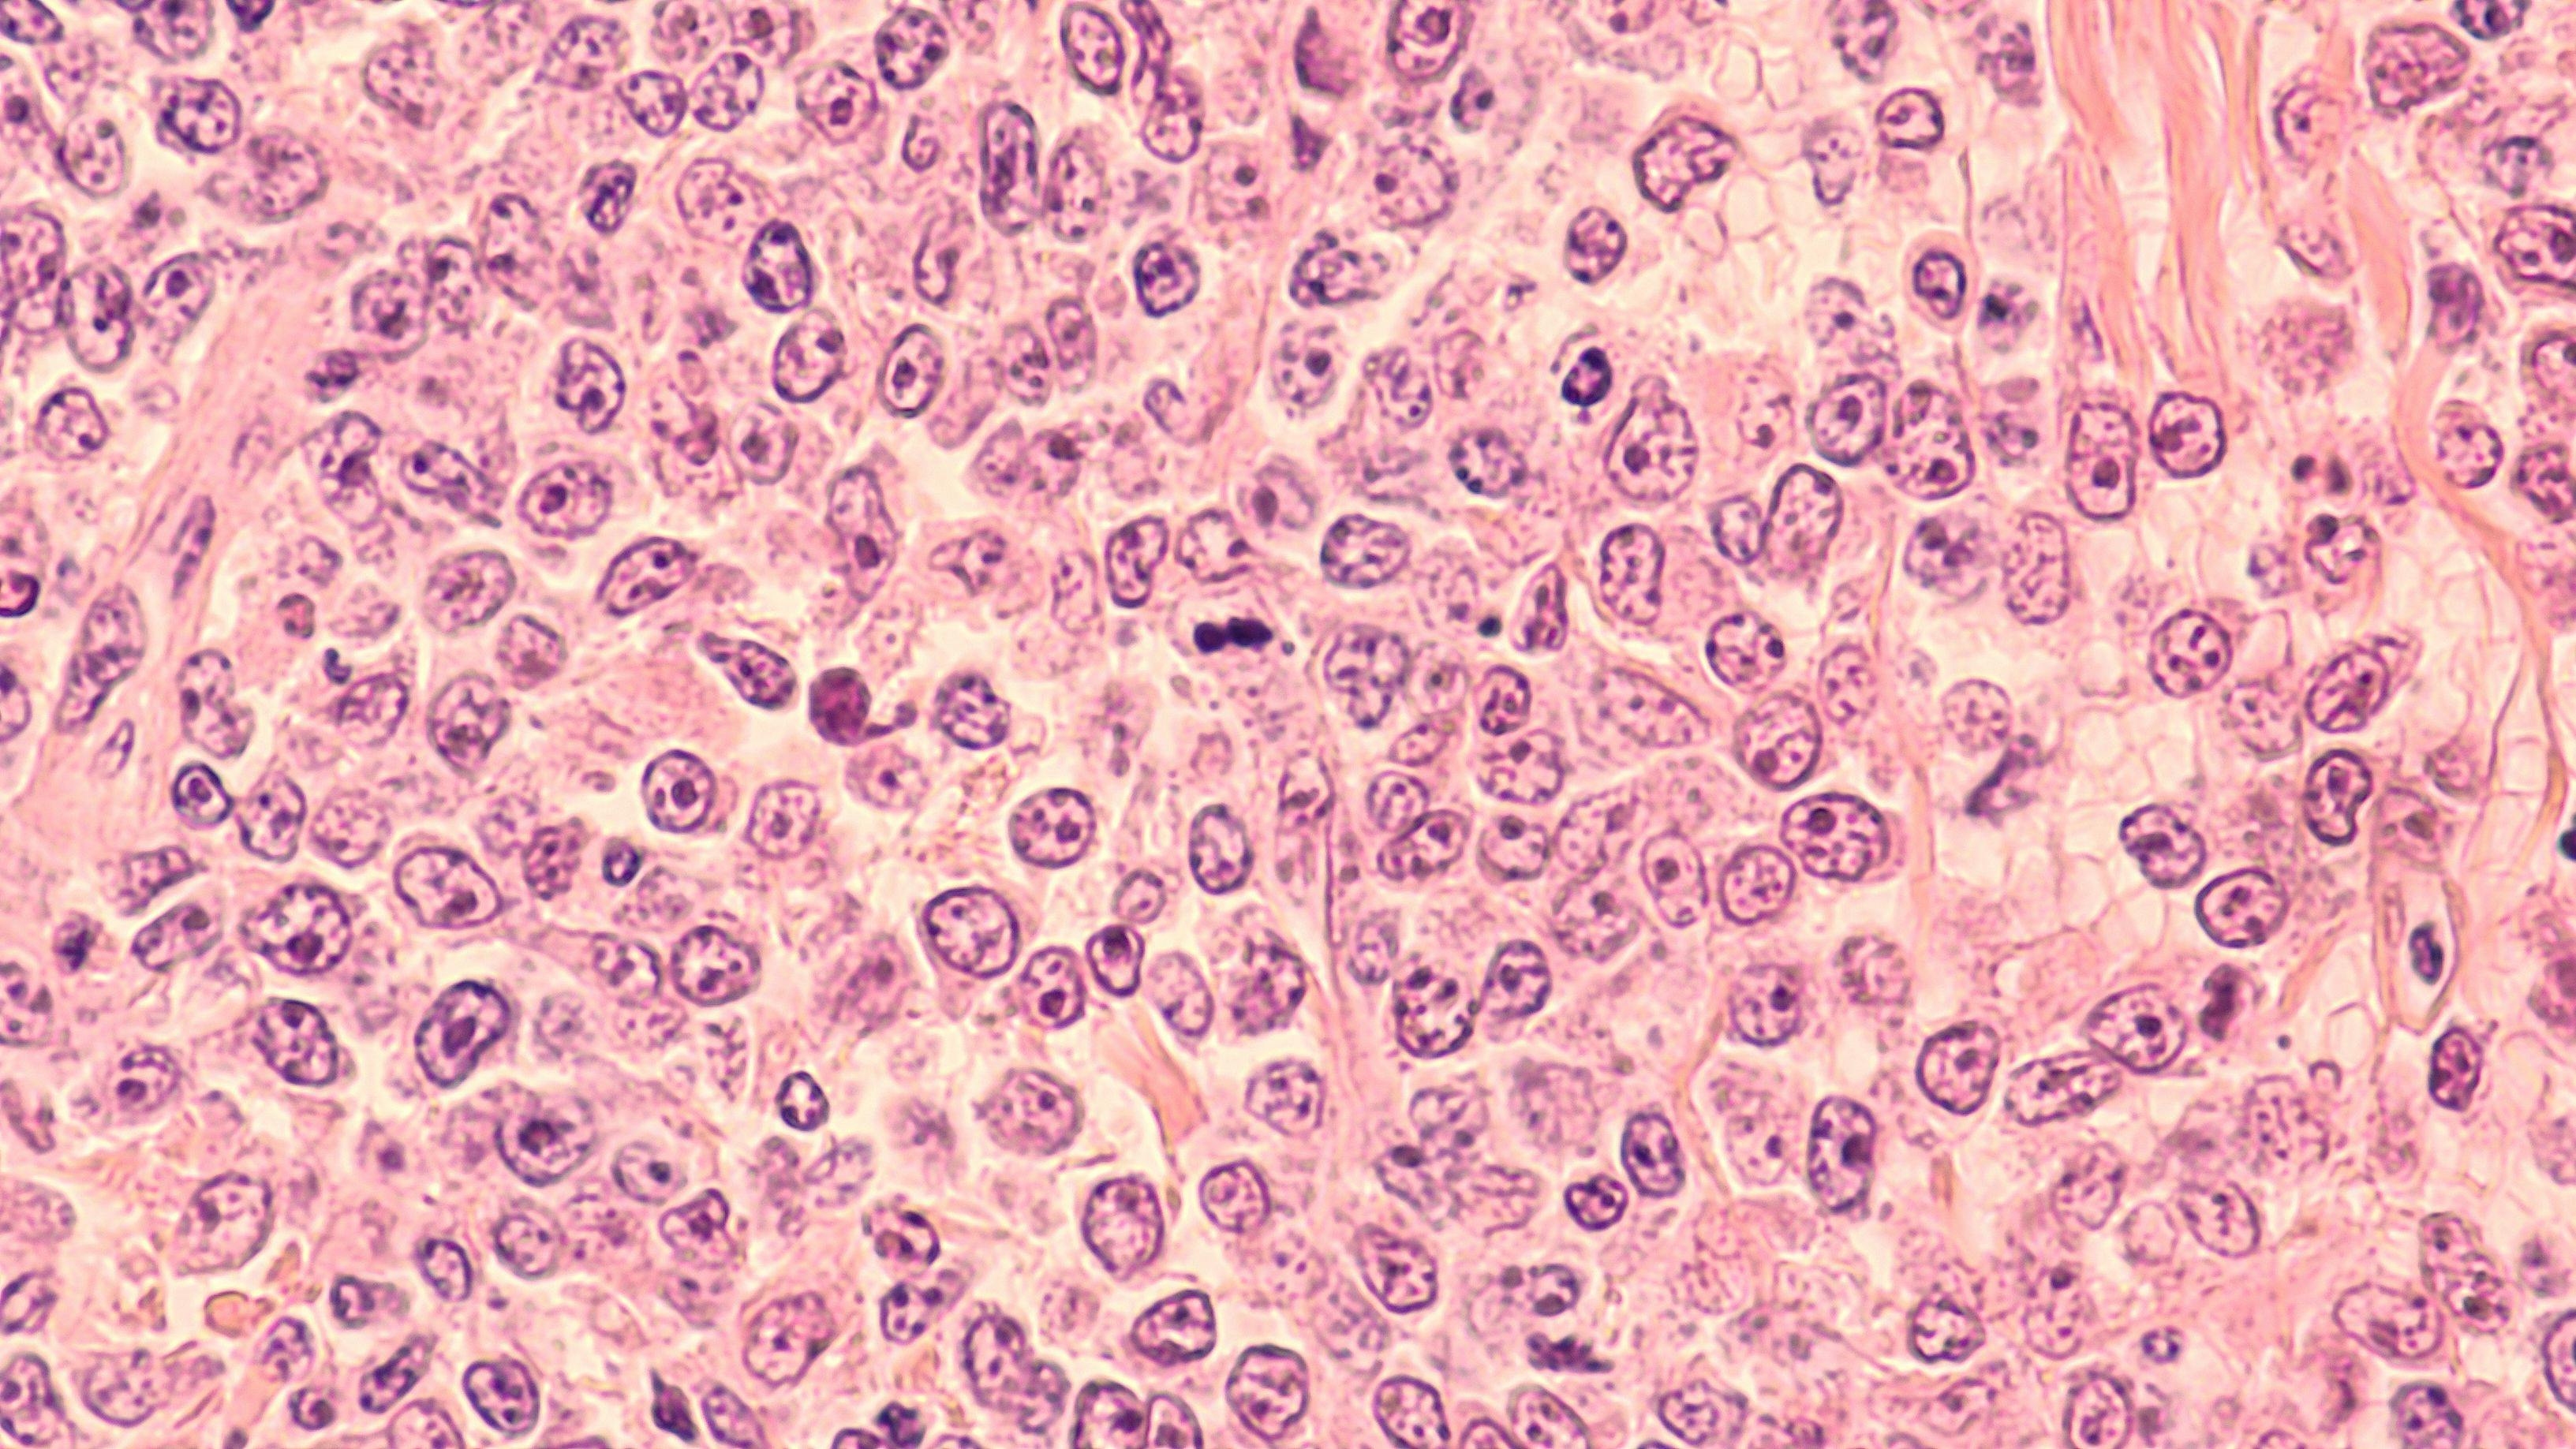 Lymphoma awareness: photomicrograph of a diffuse large B-cell lymphoma (DLBCL) a type of non-Hodgkin lymphoma. This case is from the testis of an elderly man and shows prominent nucleol | Image Credit: David A Litman - www.stock.adobe.com